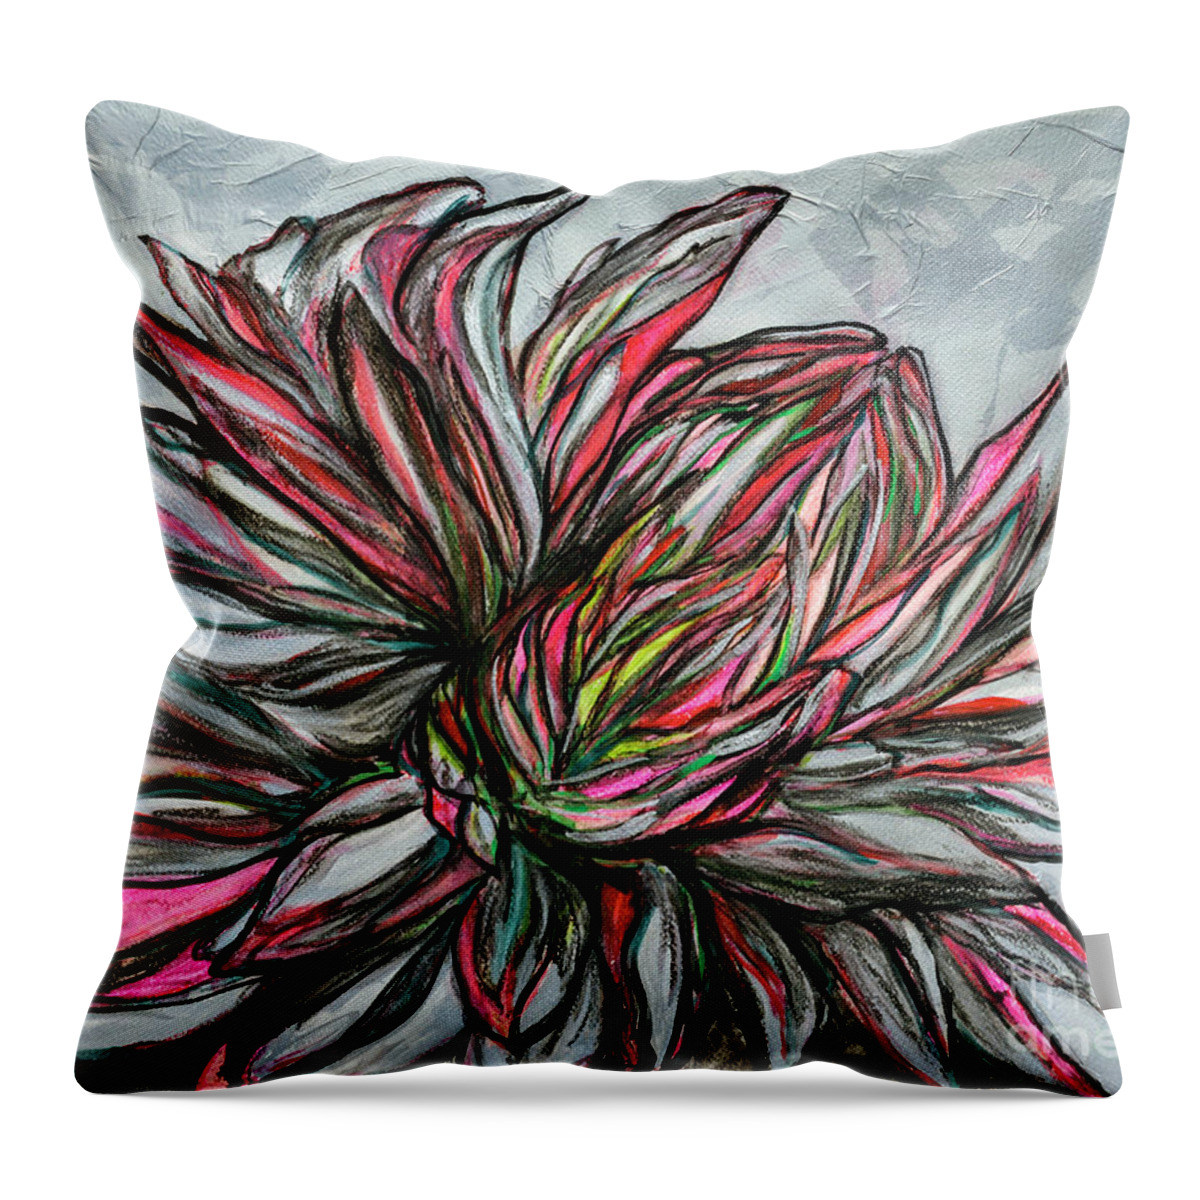 Dahlia Throw Pillow featuring the painting Dahlia by Rebecca Weeks